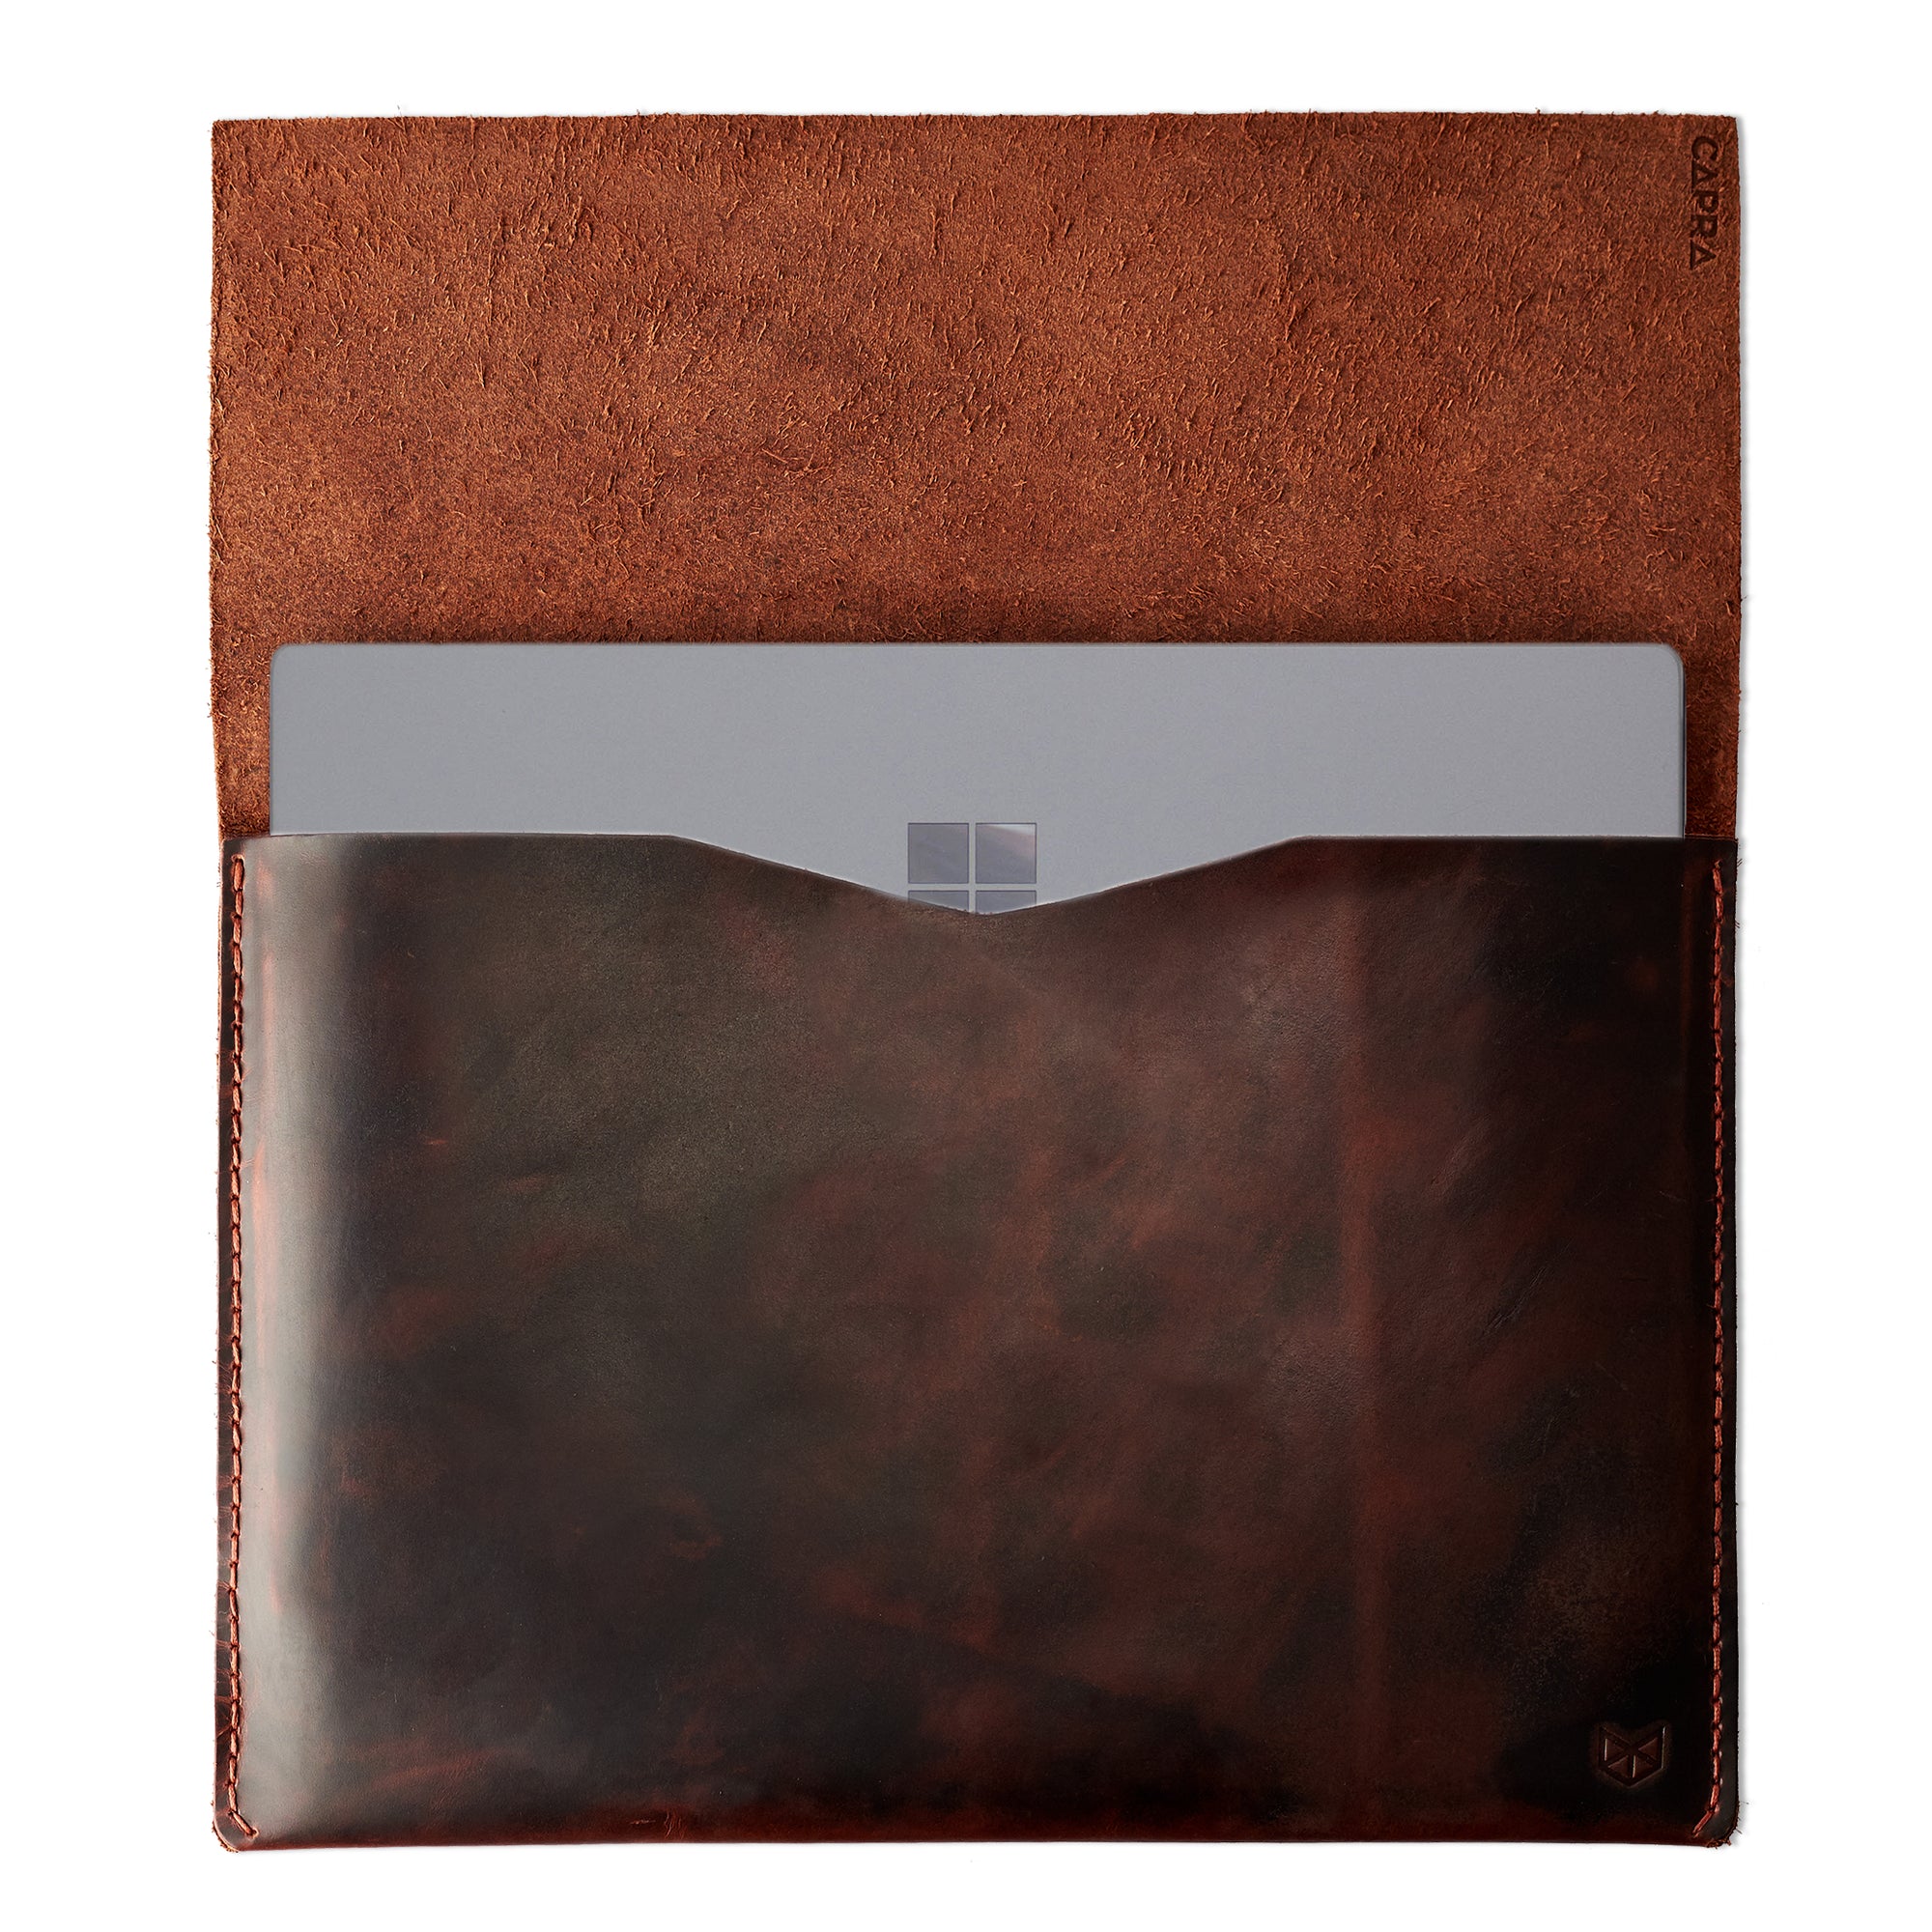 Open. Red brown  leather Surface sleeve. Designer unique mens cases.